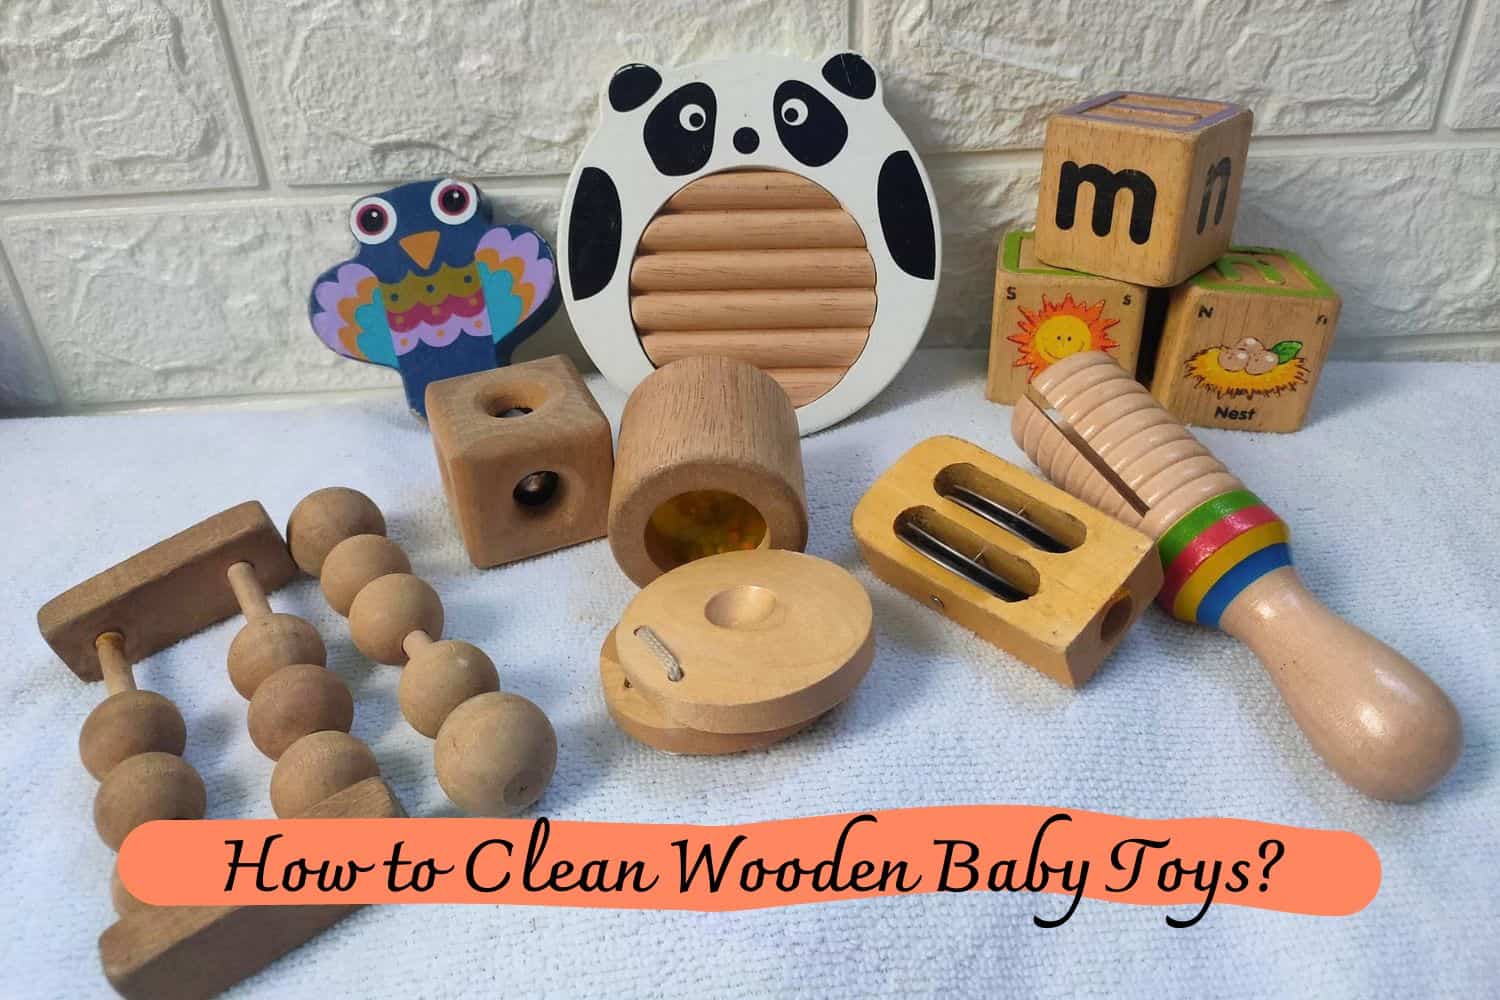 How to Clean Wooden Baby Toys?